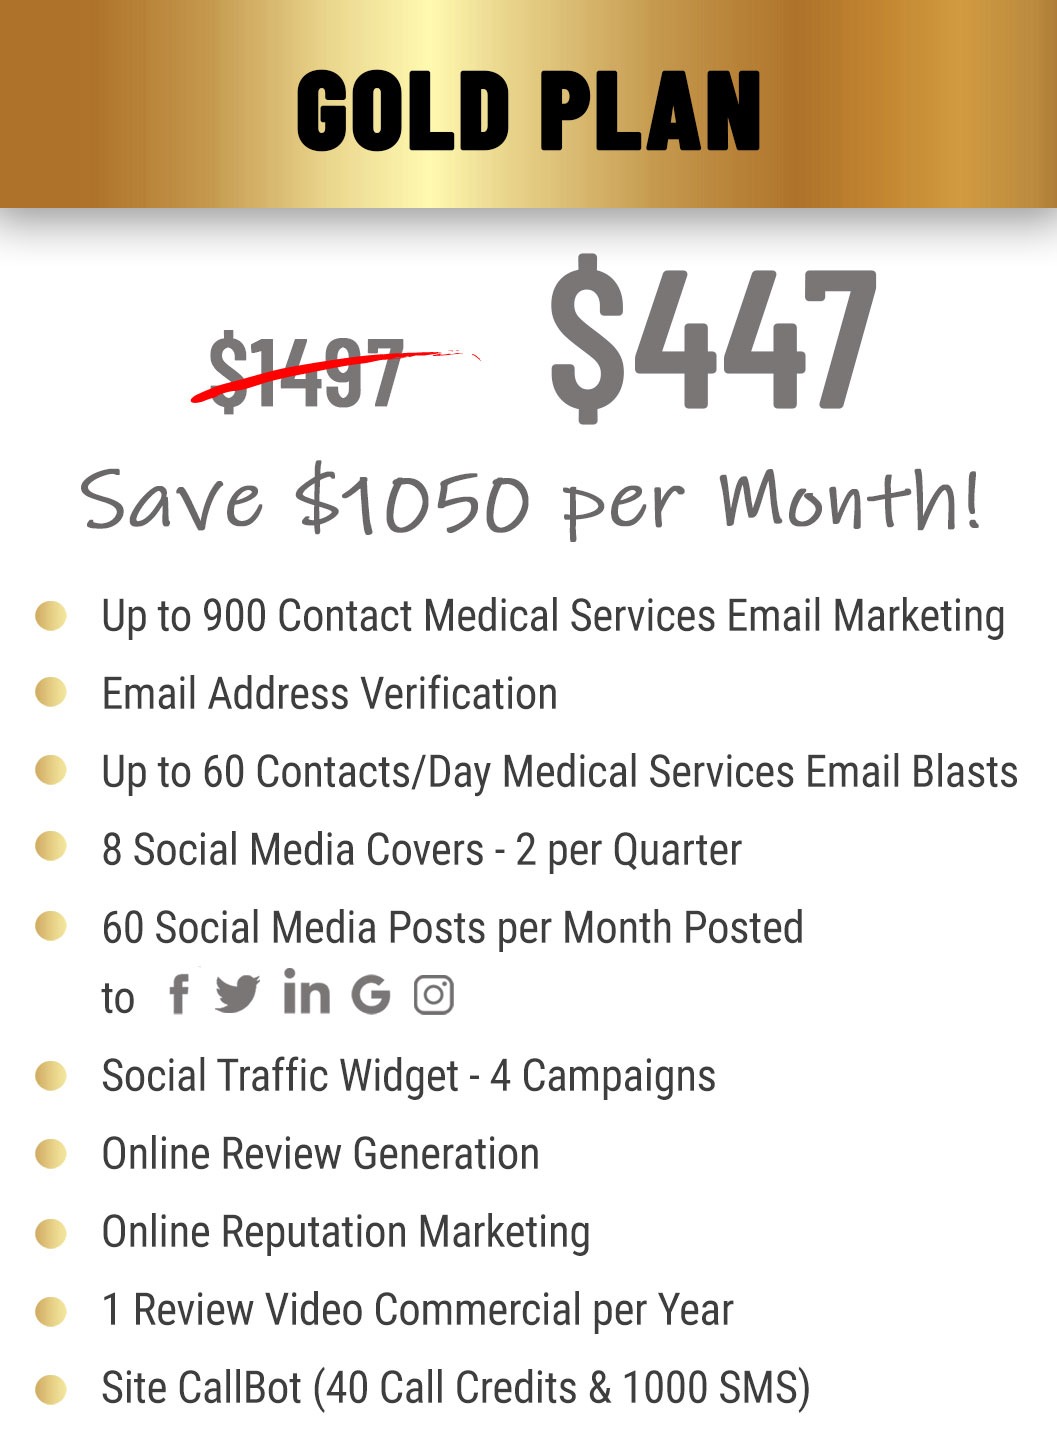 Gold Plan Pricing and Features MEDICAL SERVICES